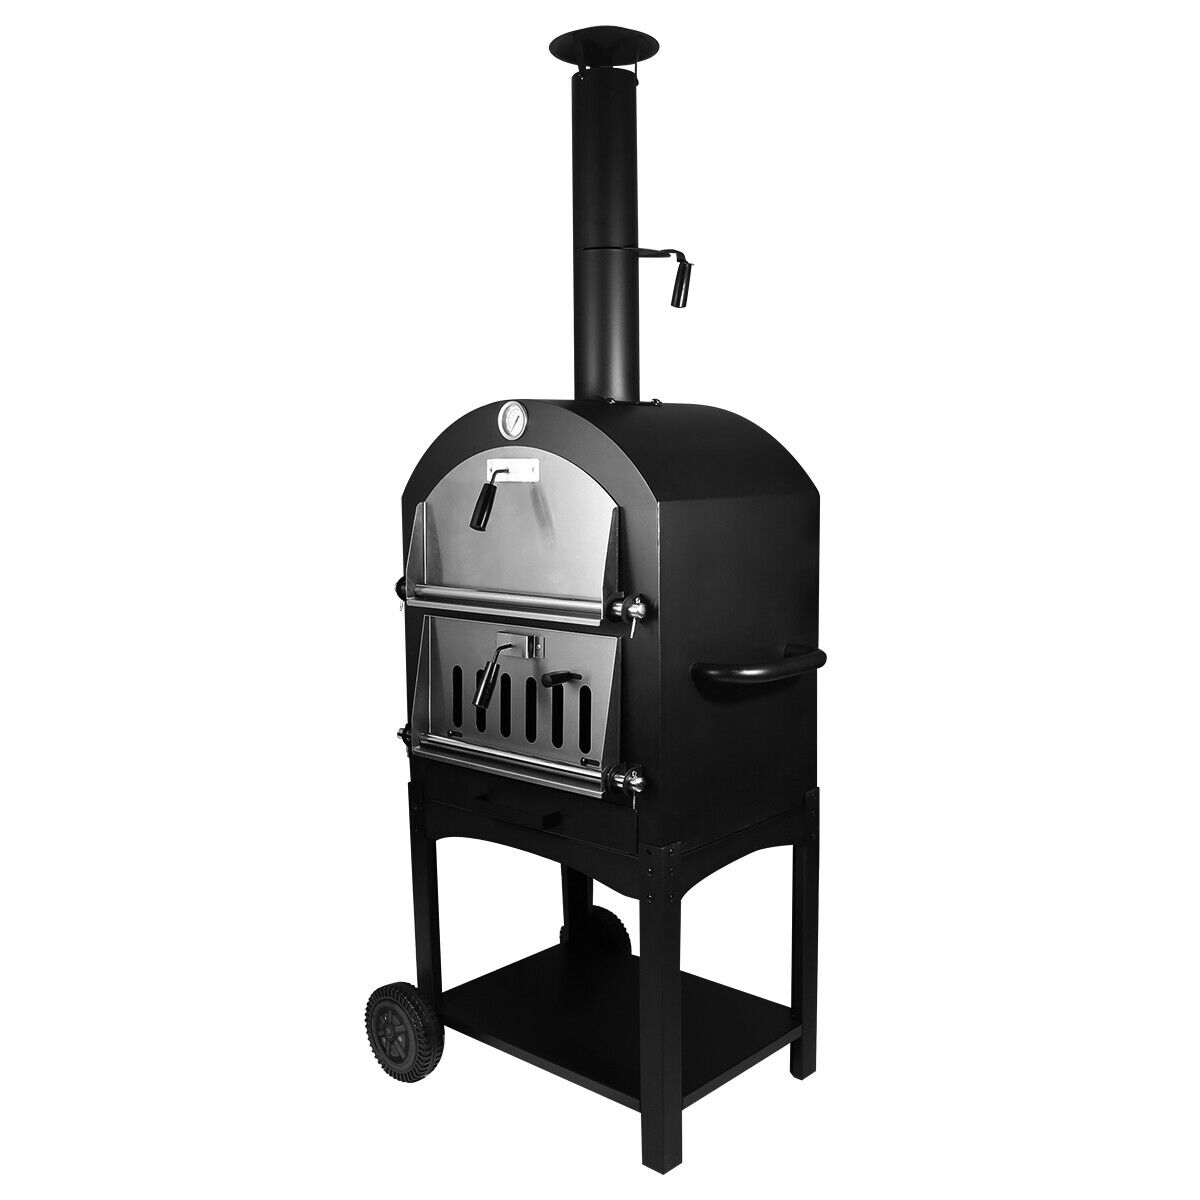 Wood-fired outdoor pizza oven and BBQ